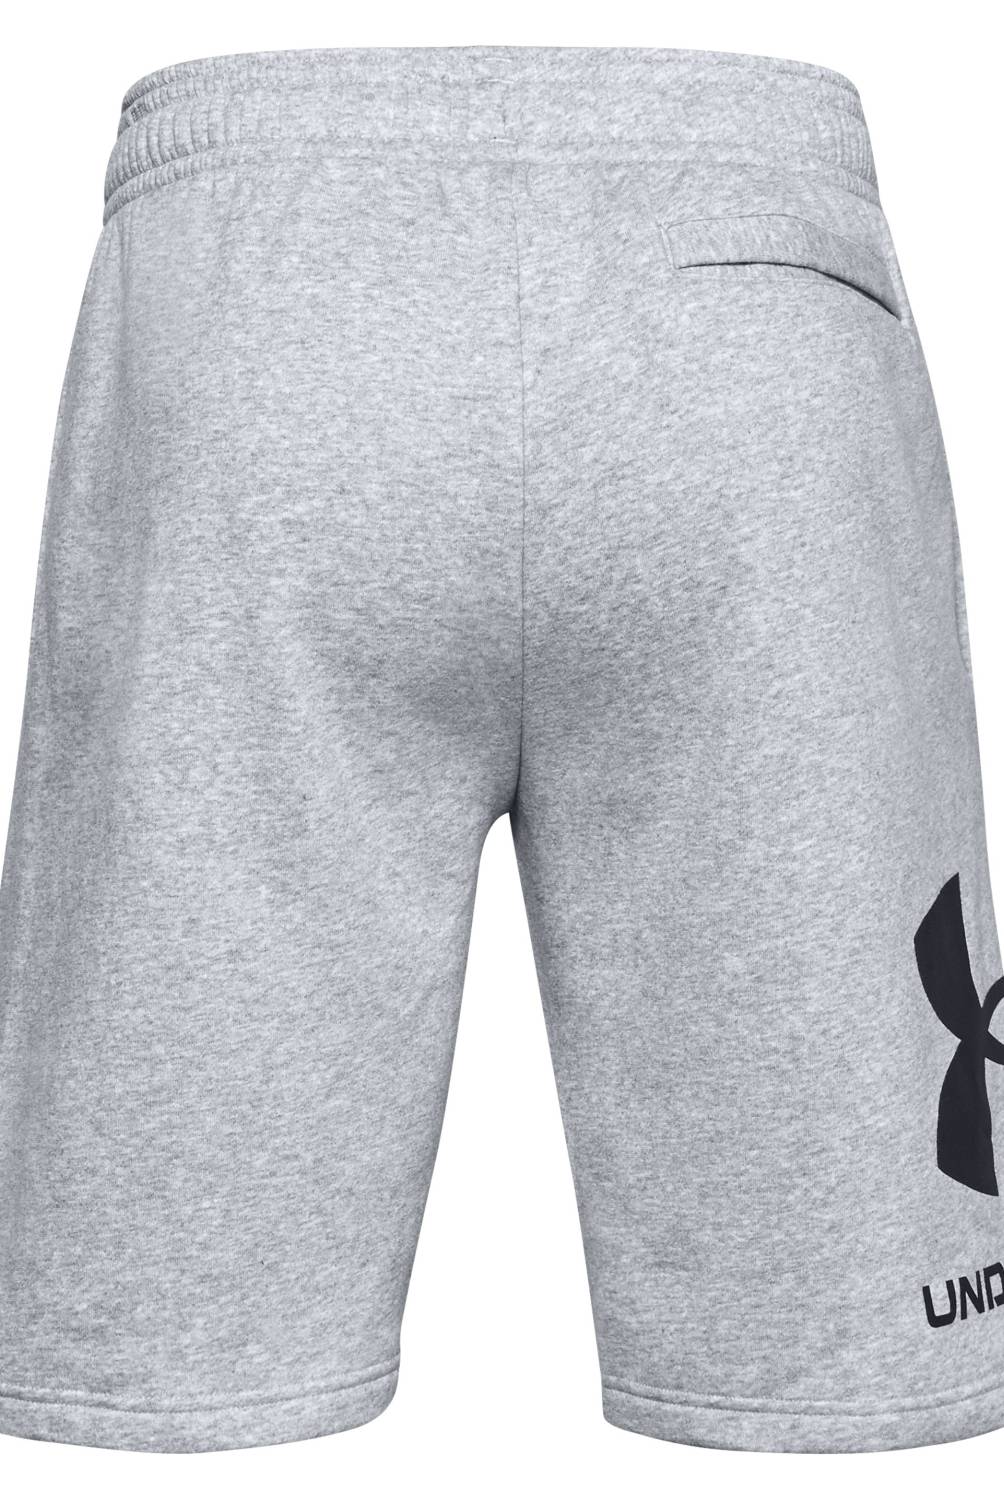 UNDER ARMOUR - Under Armour Shorts Deportivo Training Hombre